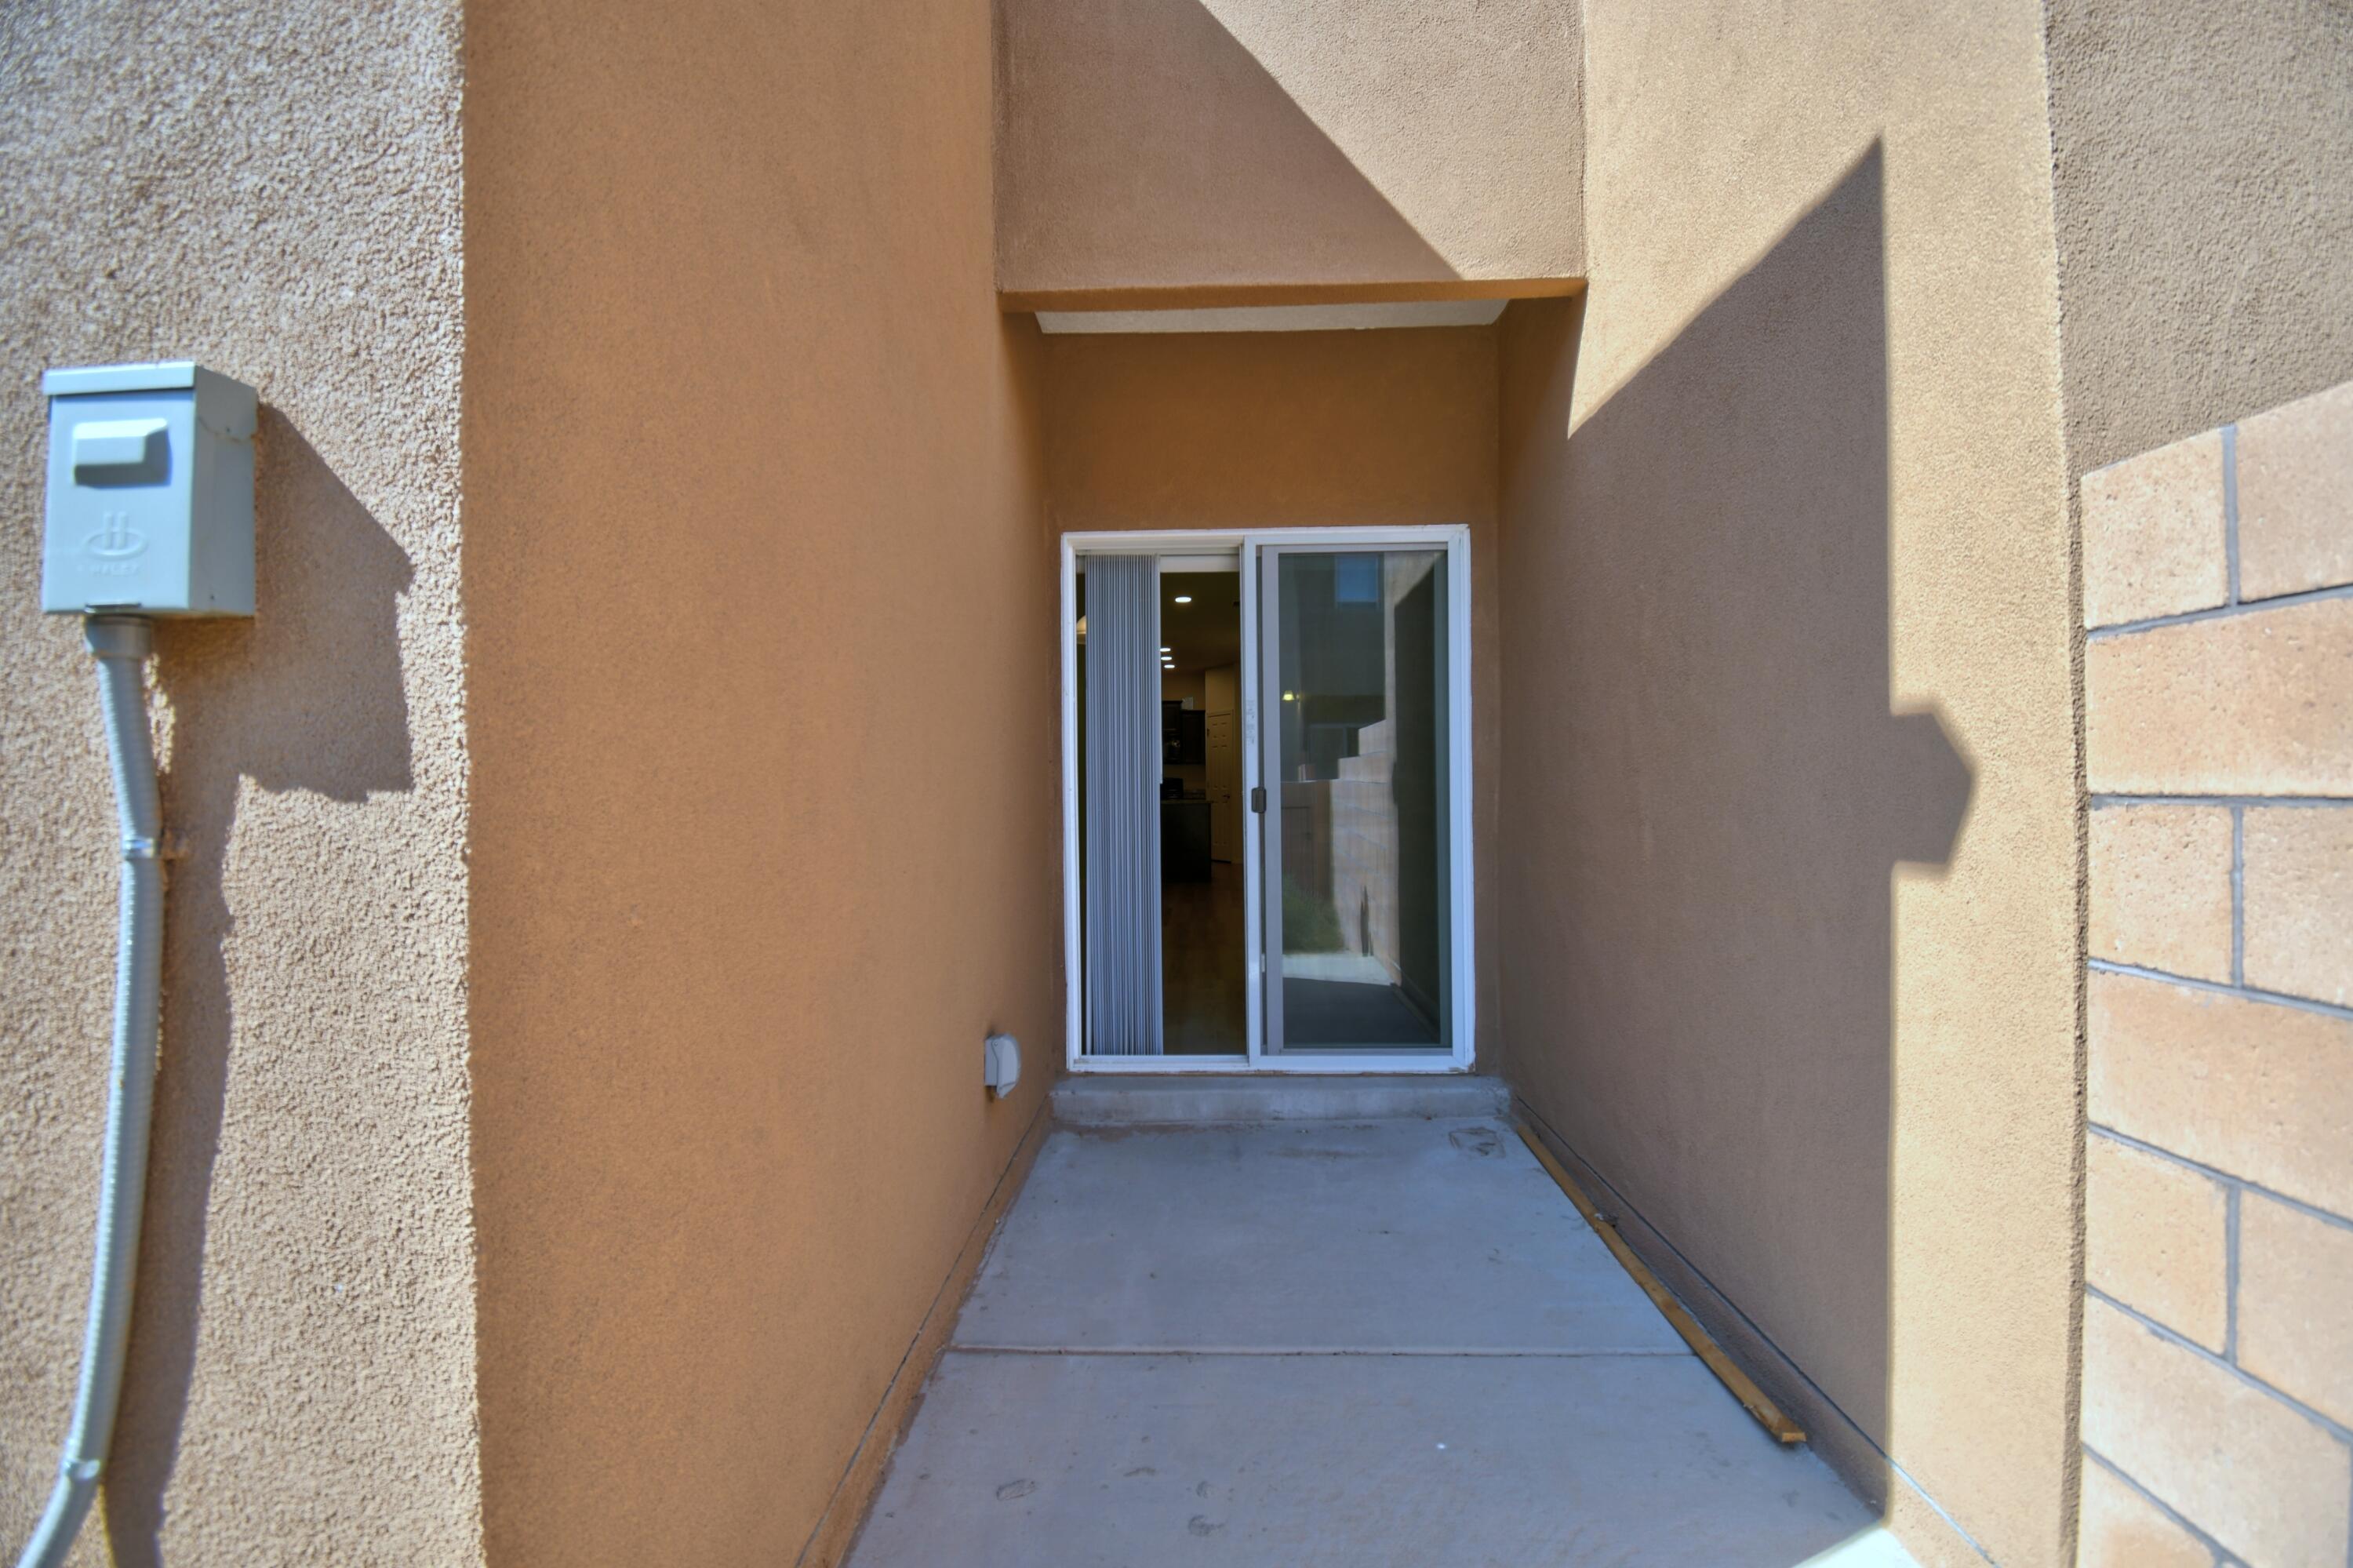 247 San Clemente Avenue NW, Albuquerque, New Mexico 87107, 3 Bedrooms Bedrooms, ,2 BathroomsBathrooms,Residential,For Sale,247 San Clemente Avenue NW,1054471